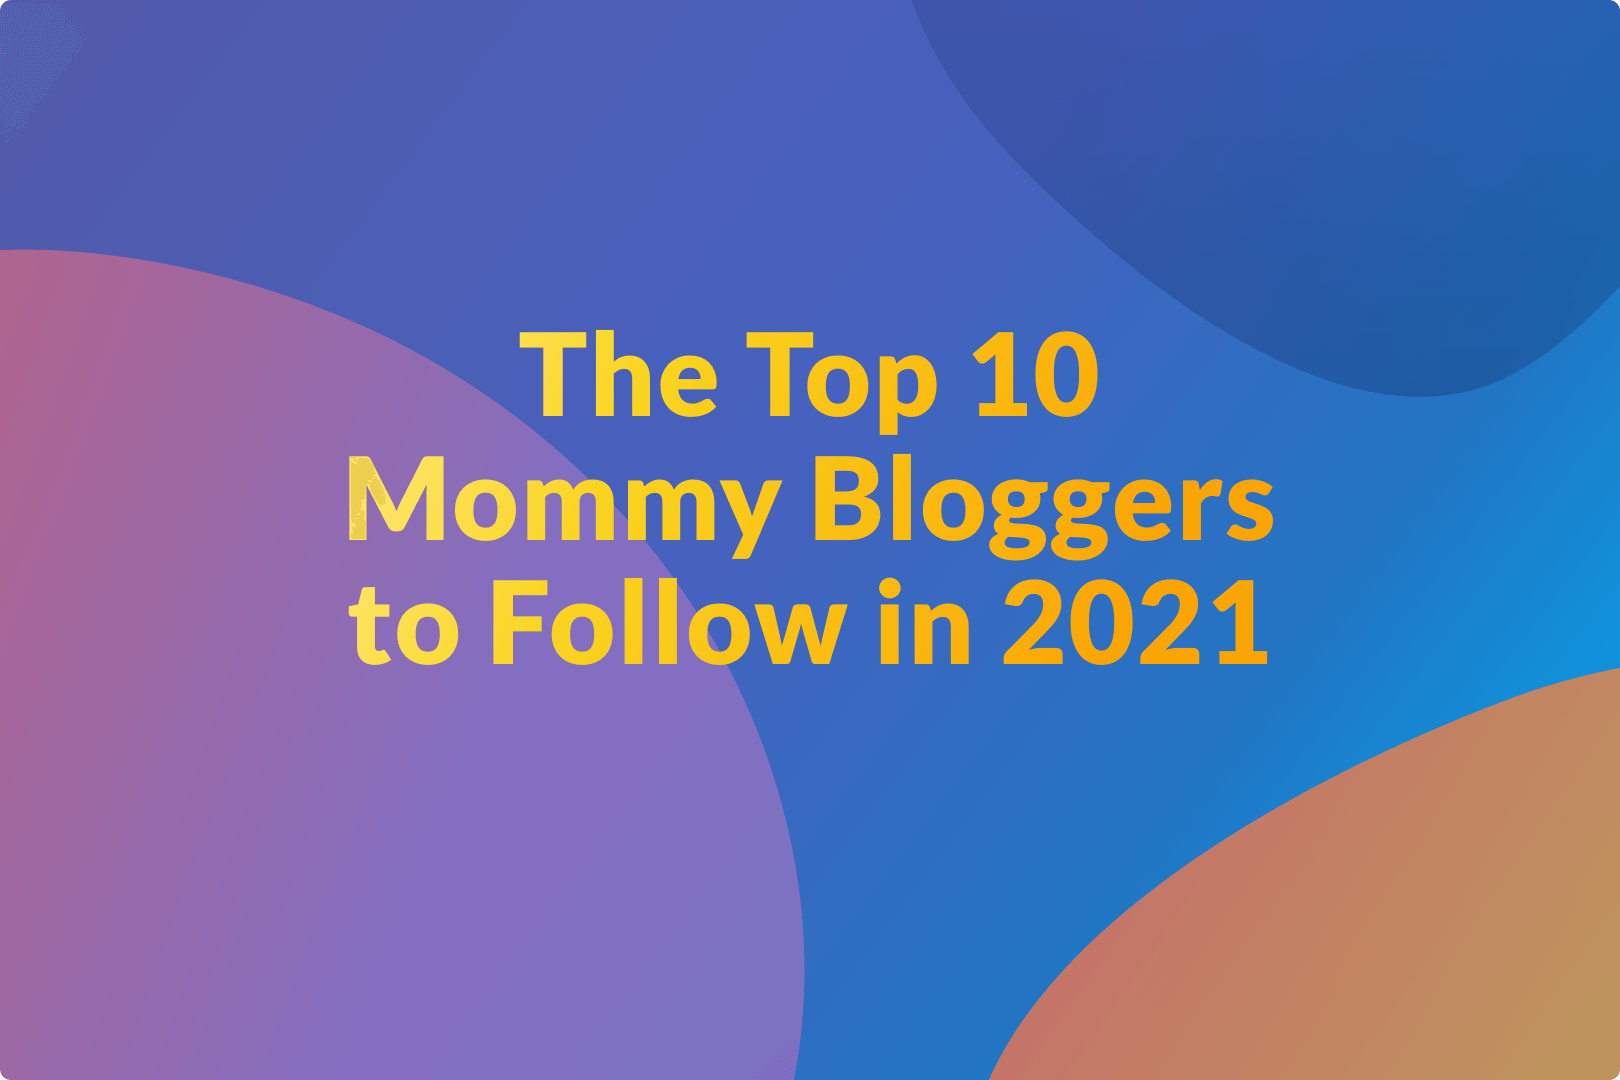 Top 10 Mommy Bloggers to Follow in 2021